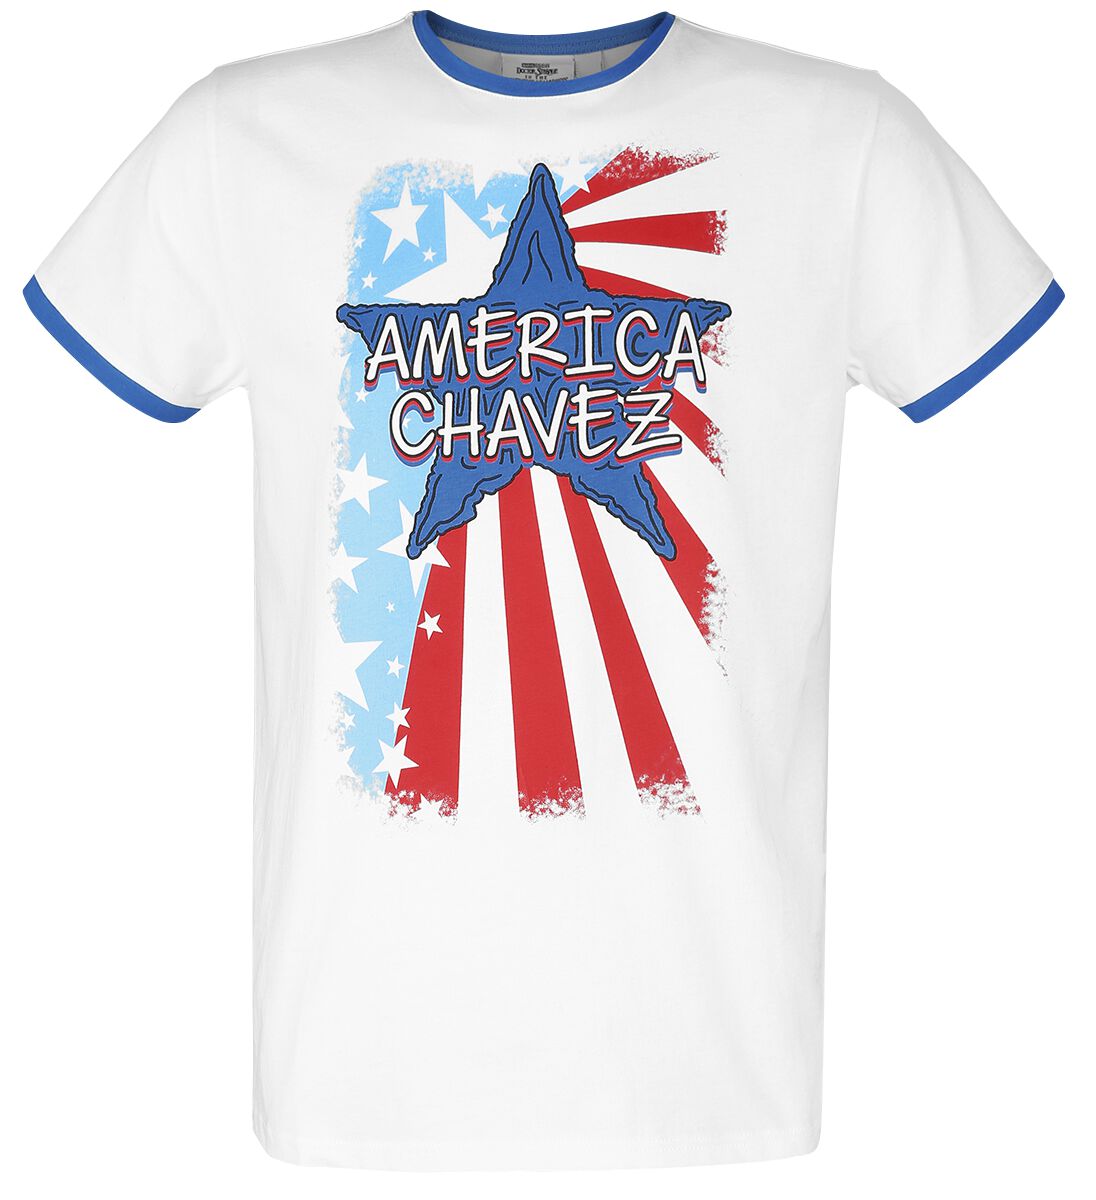 Doctor Strange In The Multiverse Of Madness - America Chavez T-Shirt white